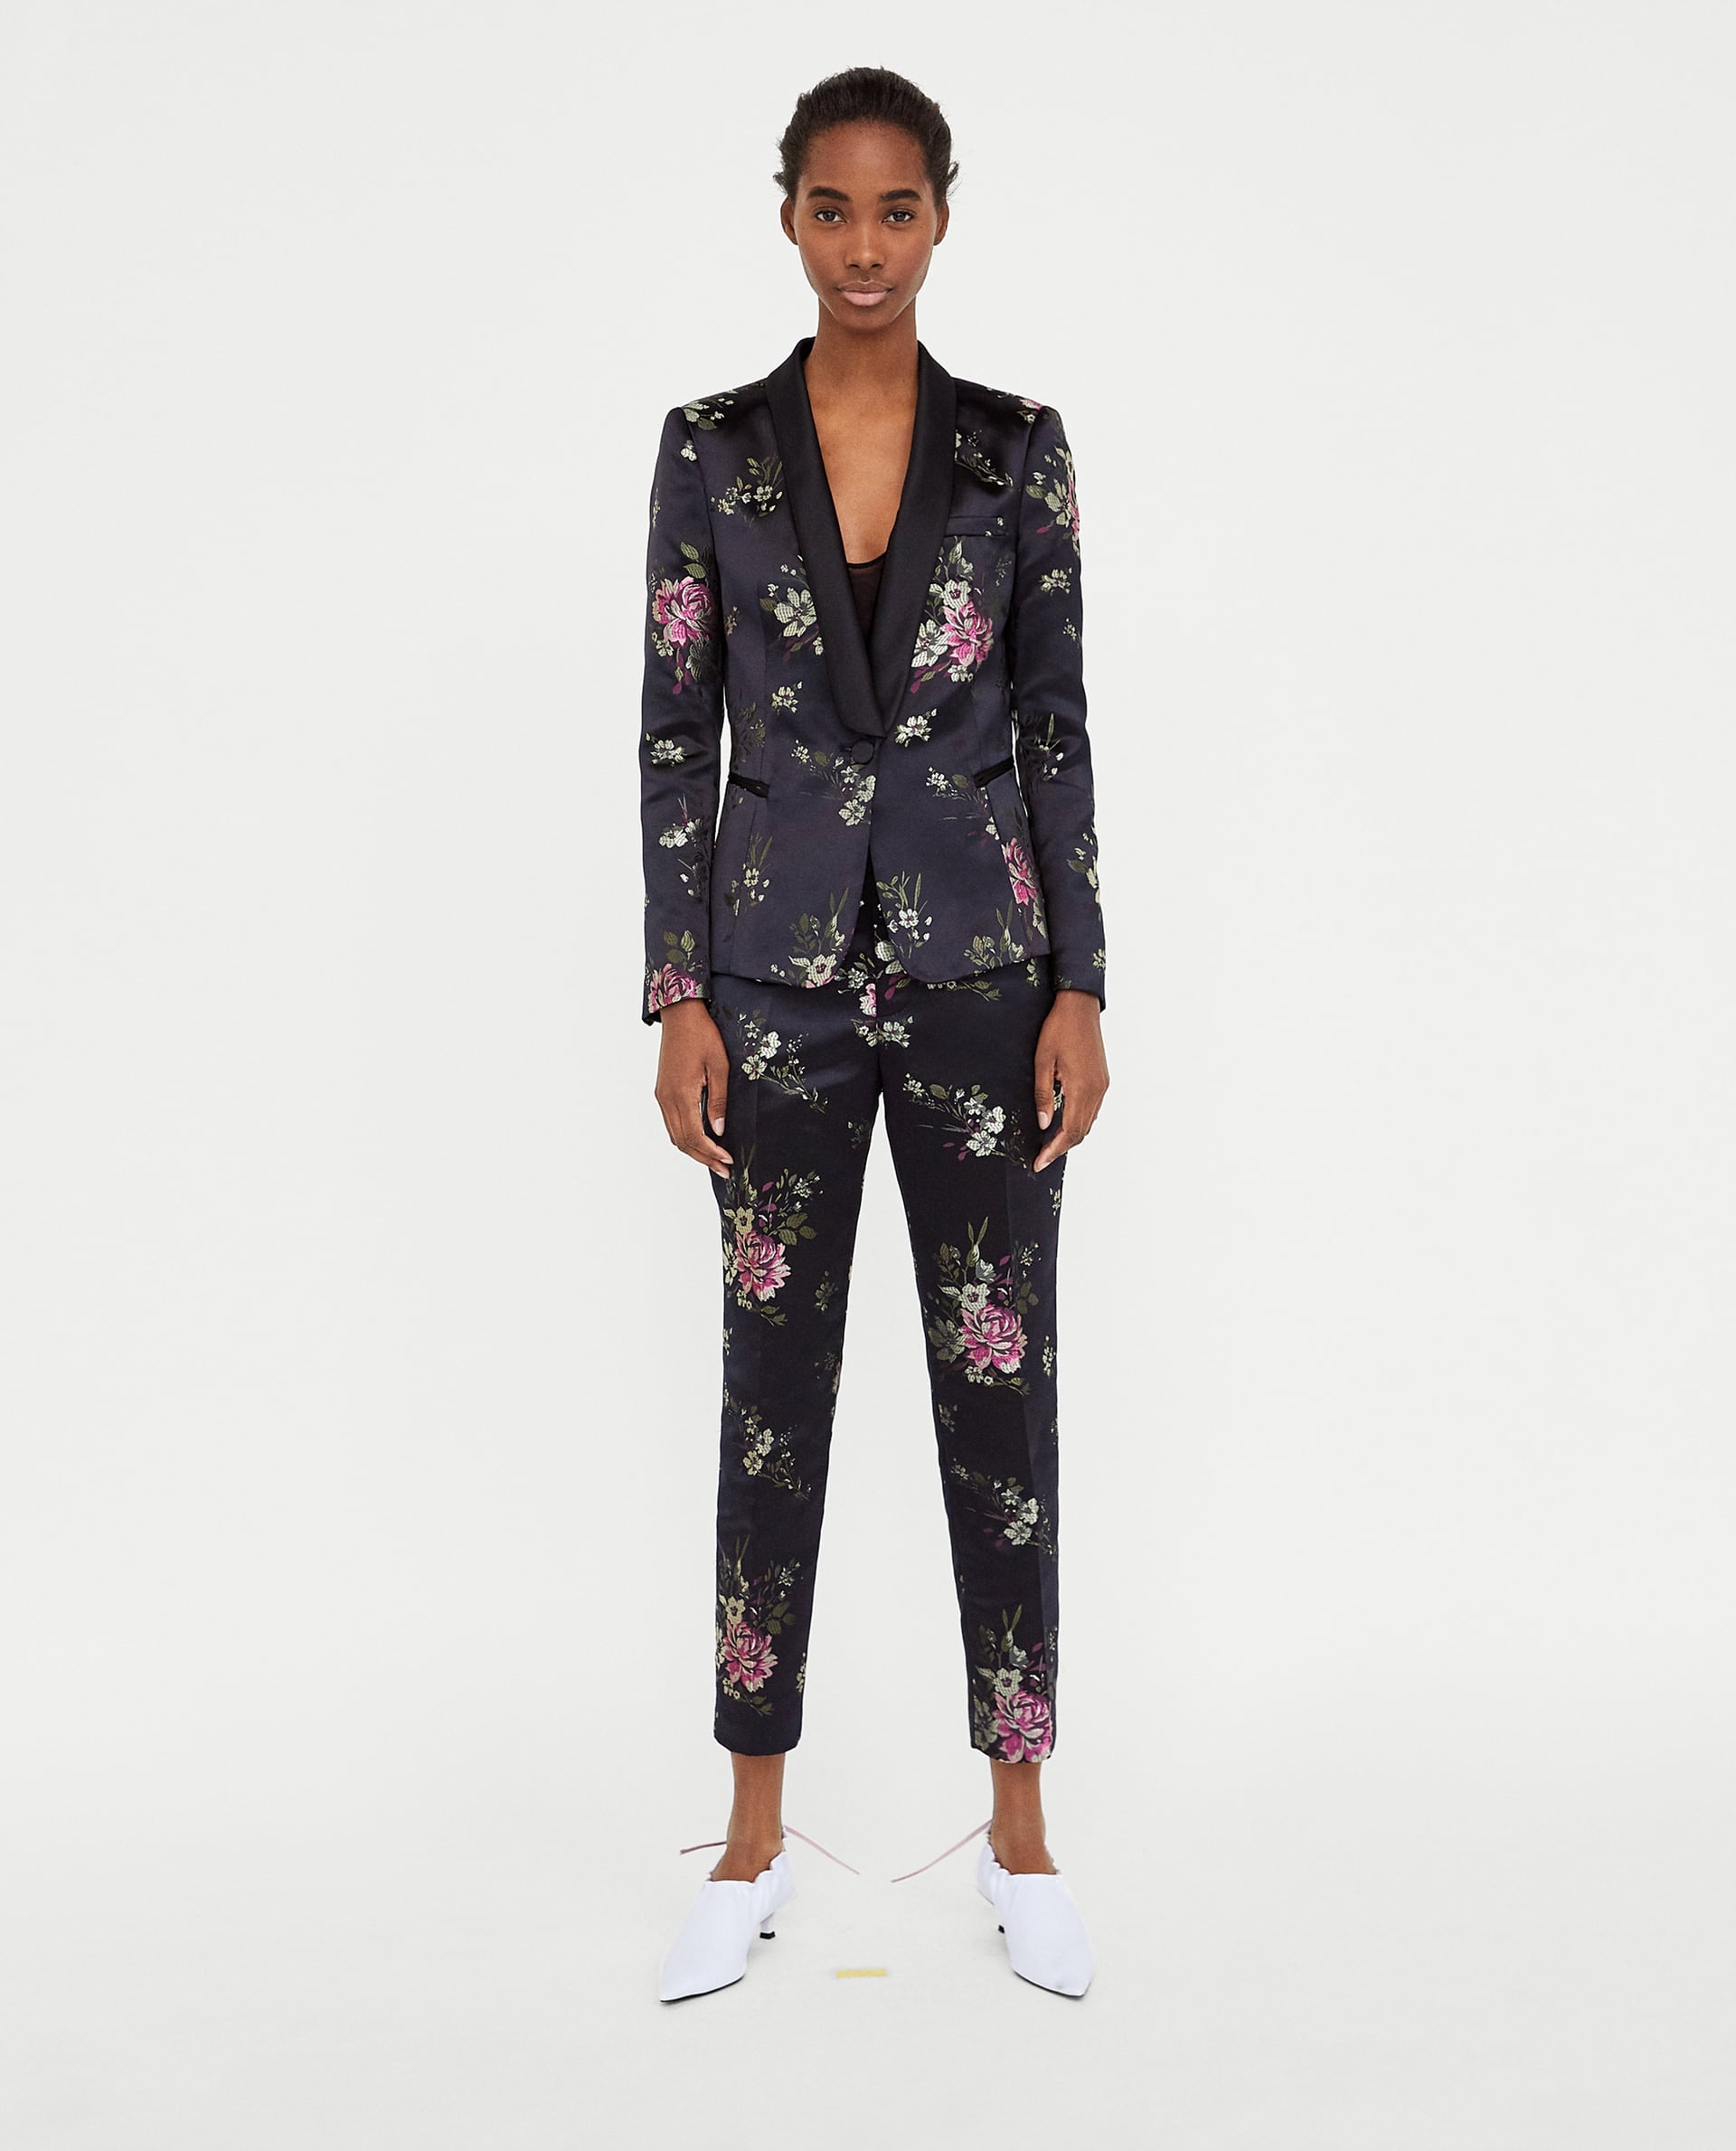 Zara Jacquard Suit | Hell Yes! Letitia 